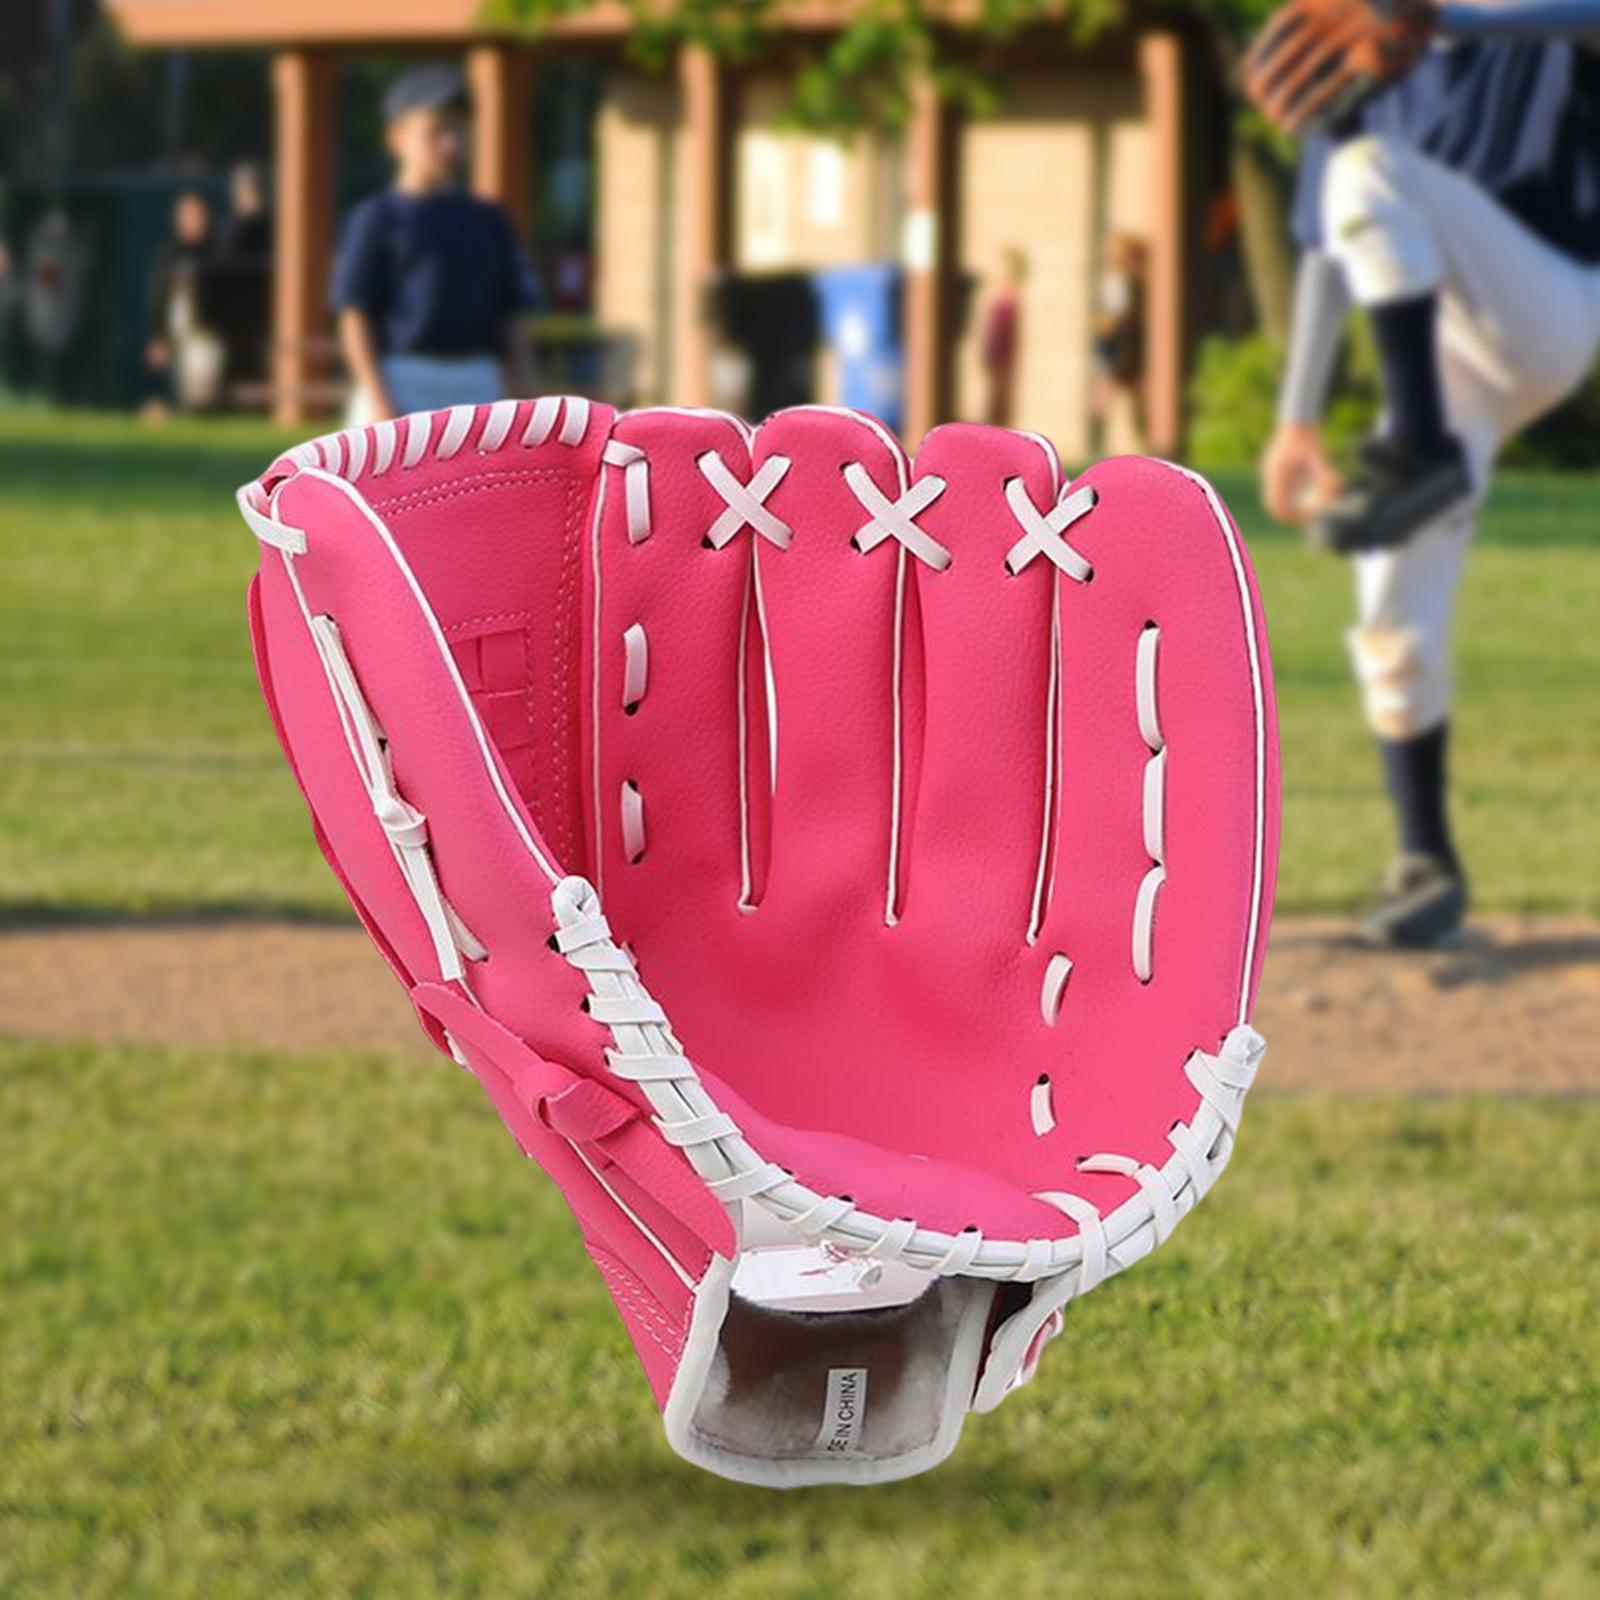 Baseball Glove Infield Pitcher Gloves Durable for Beginner Play Training 11.5inch